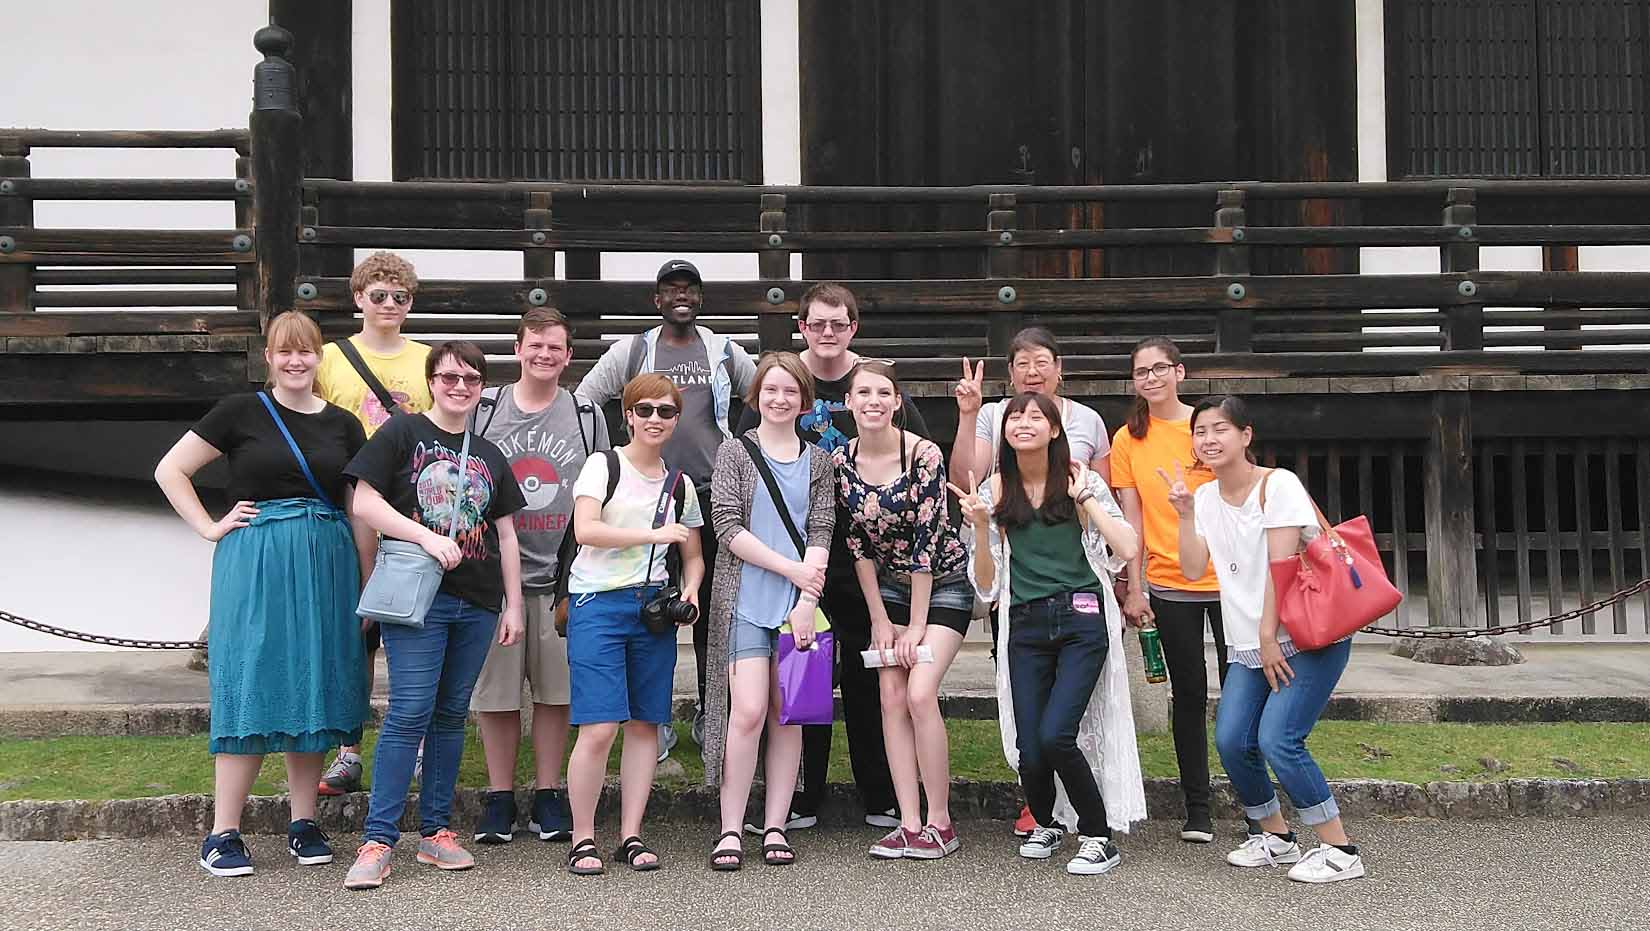 Students in front of a building on a study abroad to Japan